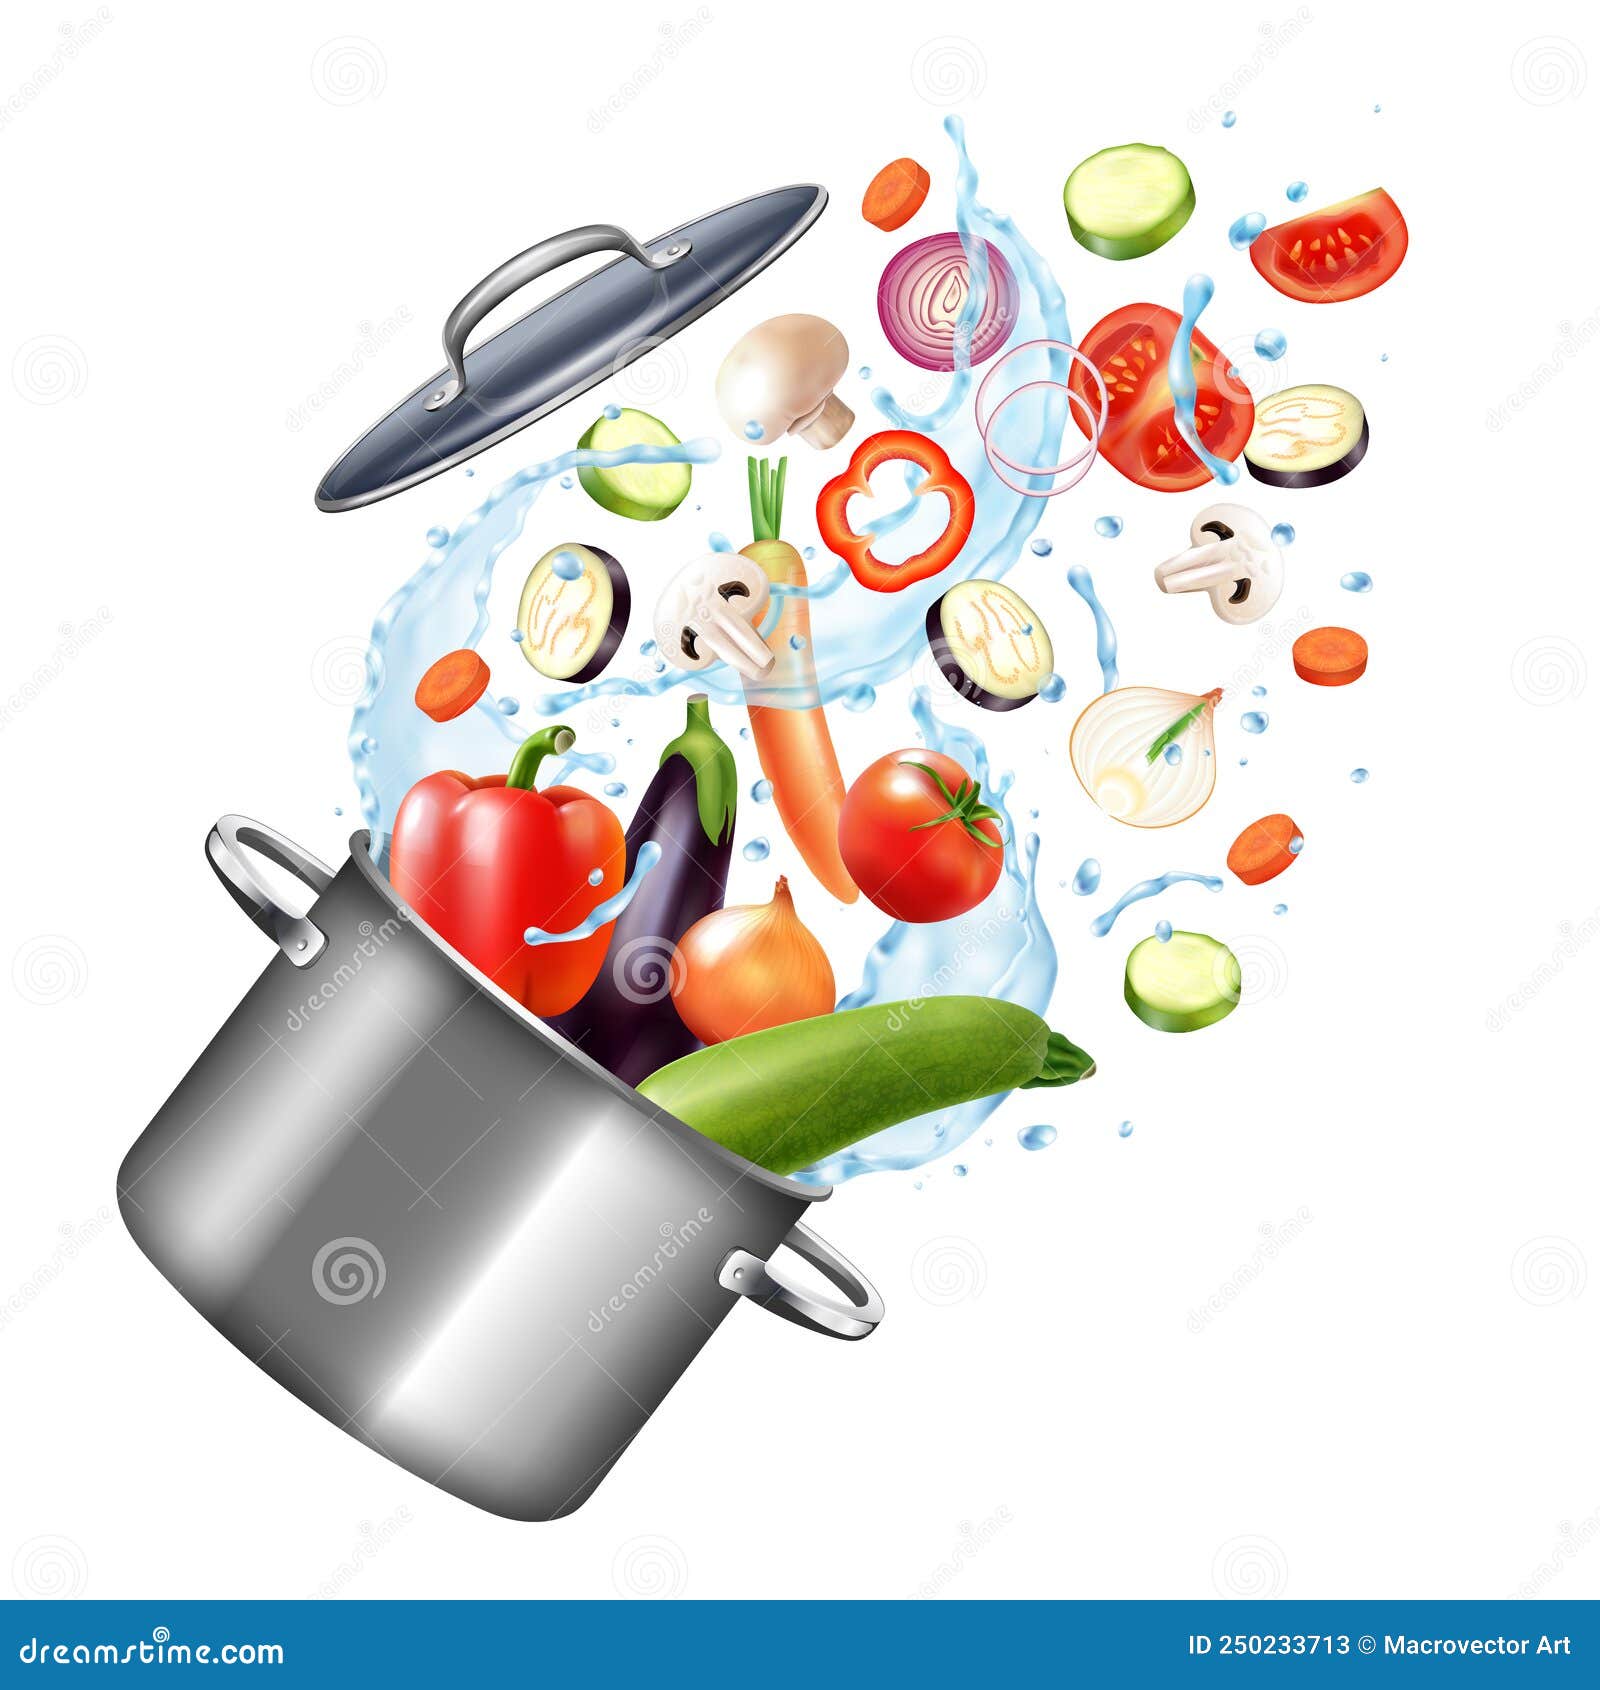 Vegetables Pot Realistic Composition Stock Vector - Illustration of ...